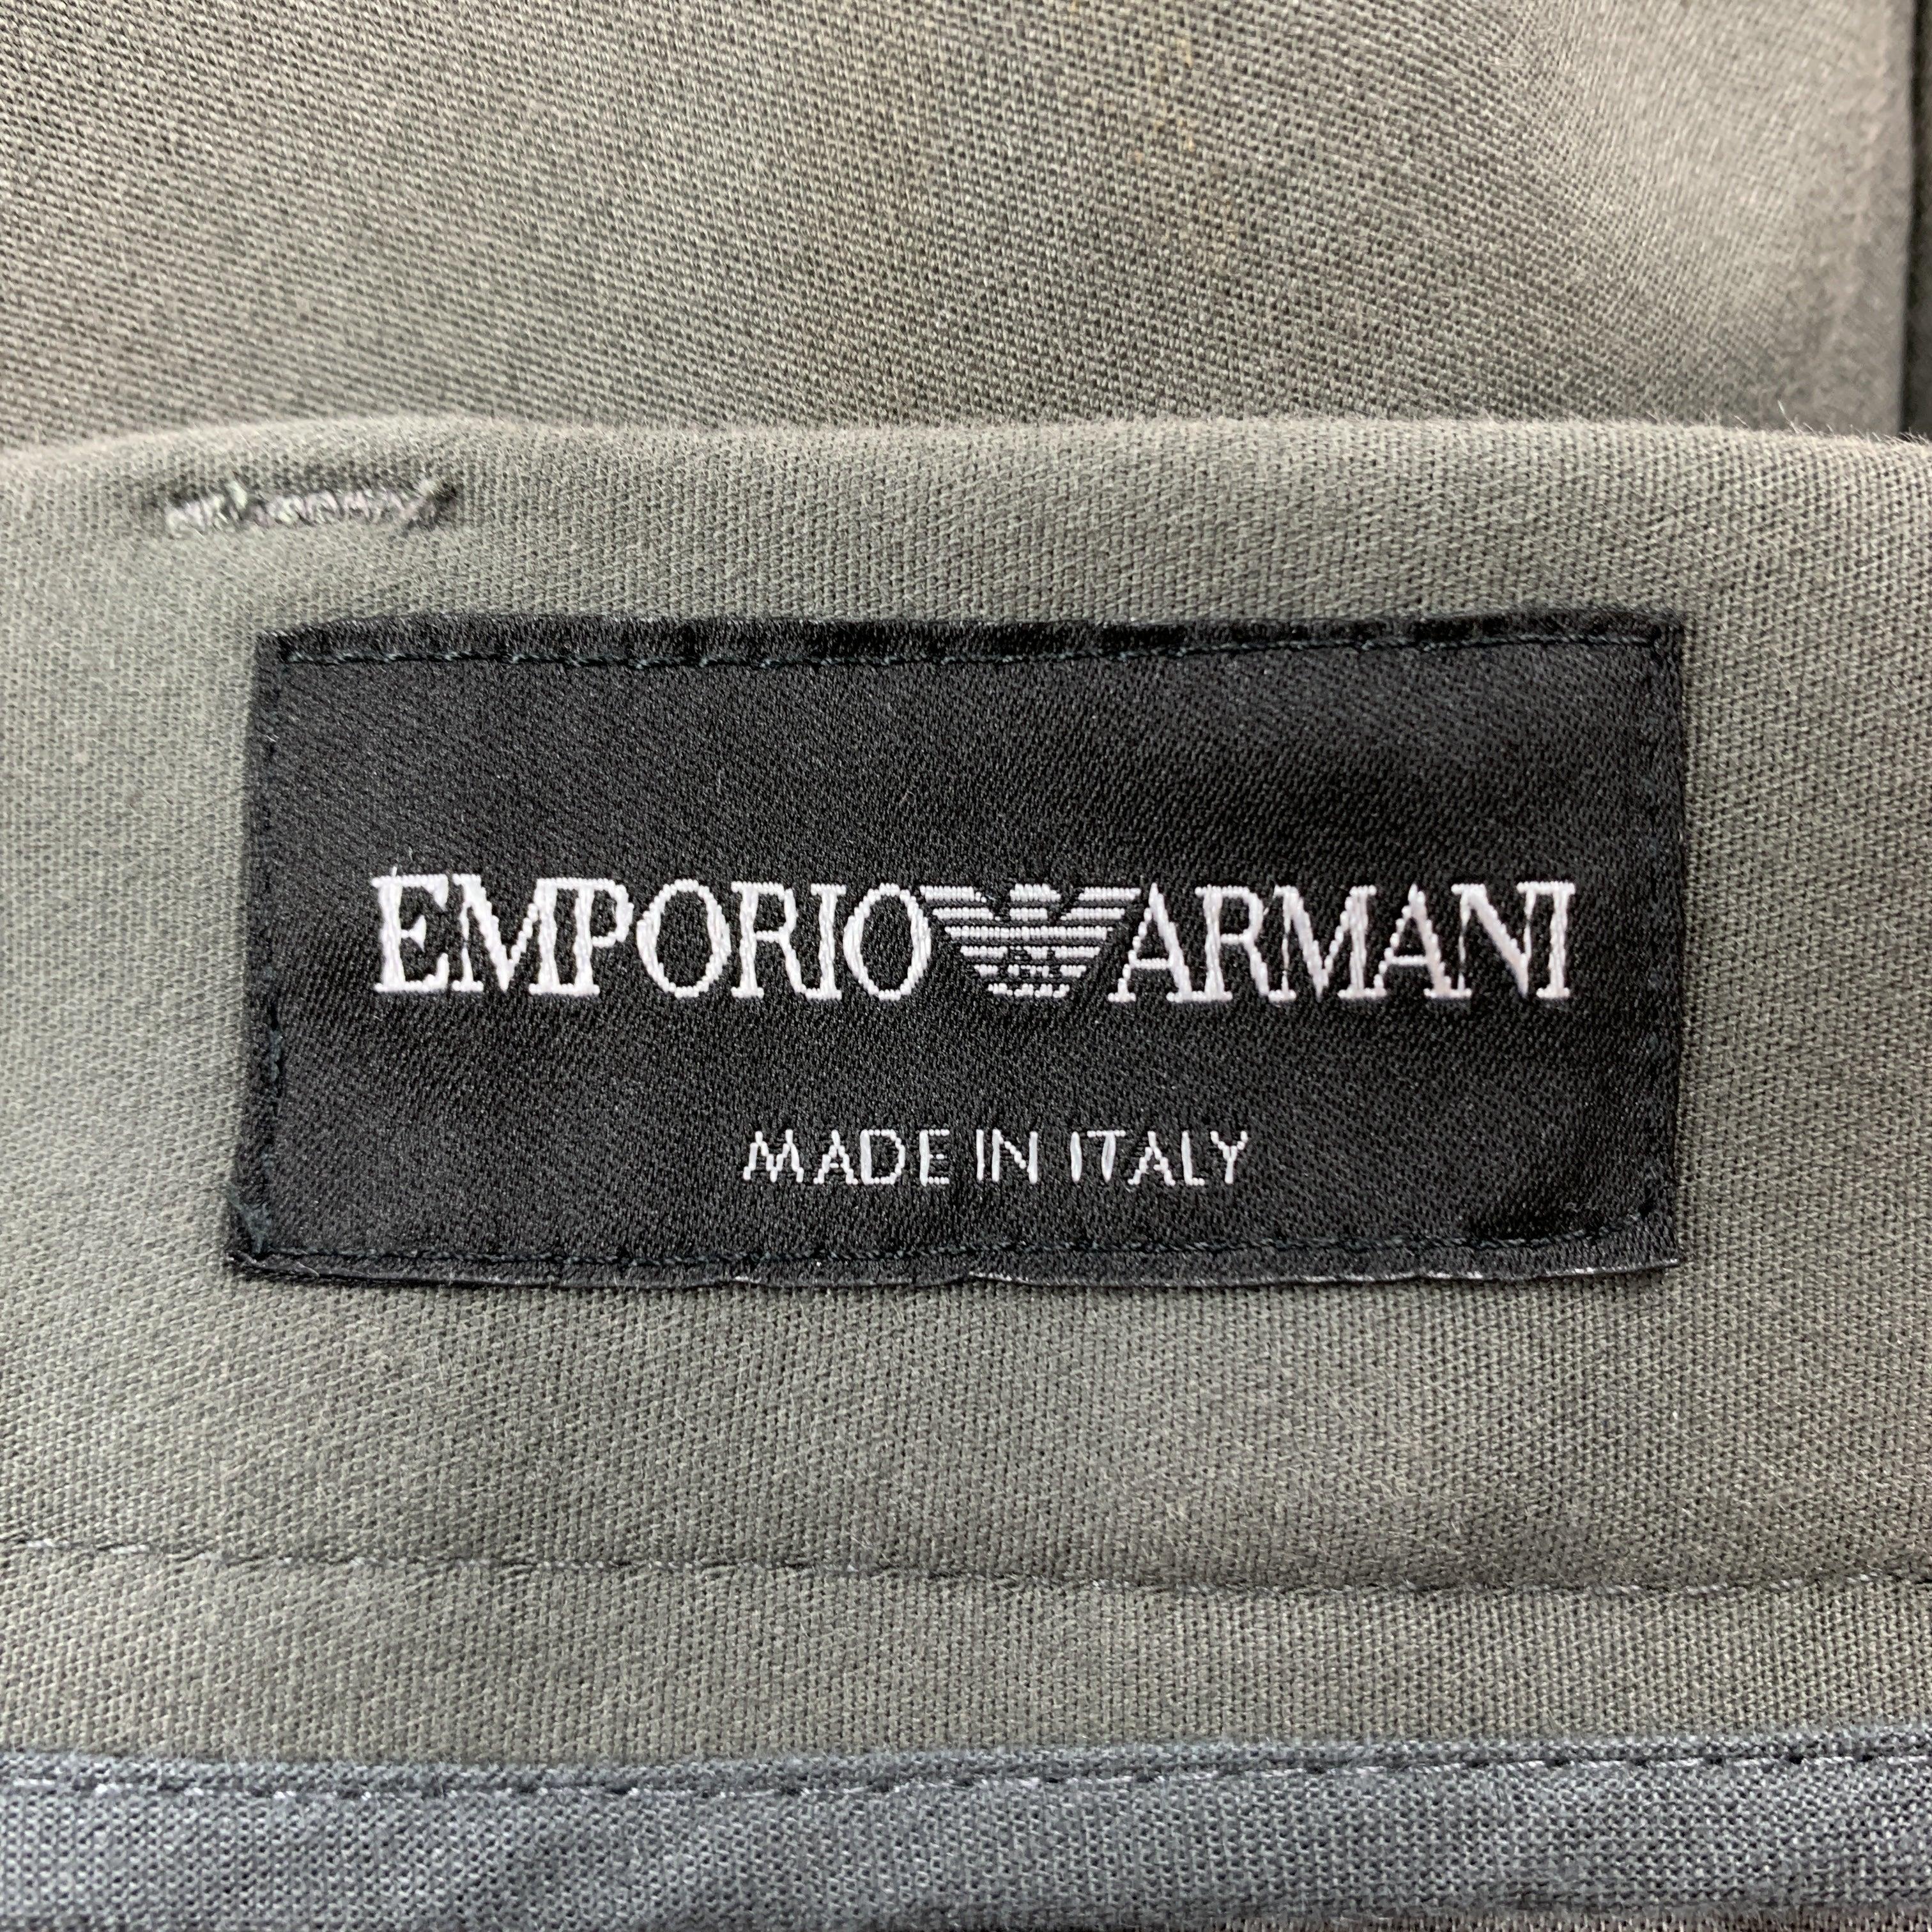 EMPORIO ARMANI Size 30 Slate Solid Cotton Zip Fly Casual Pants 2